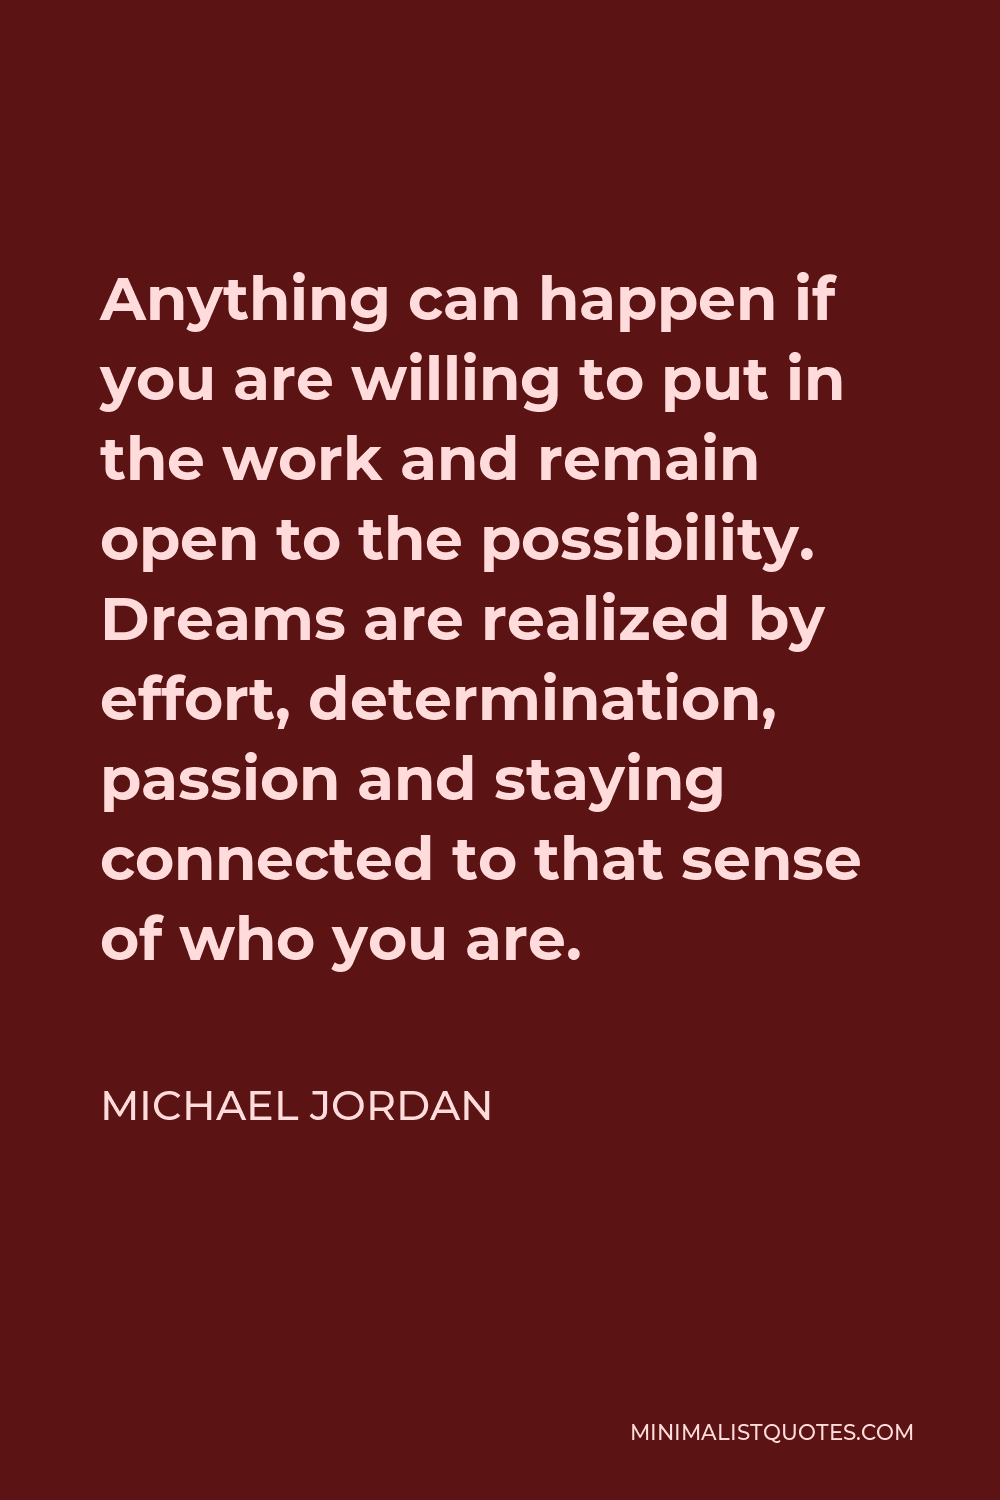 Michael Jordan Quote - Anything can happen if you are willing to put in the work and remain open to the possibility. Dreams are realized by effort, determination, passion and staying connected to that sense of who you are.